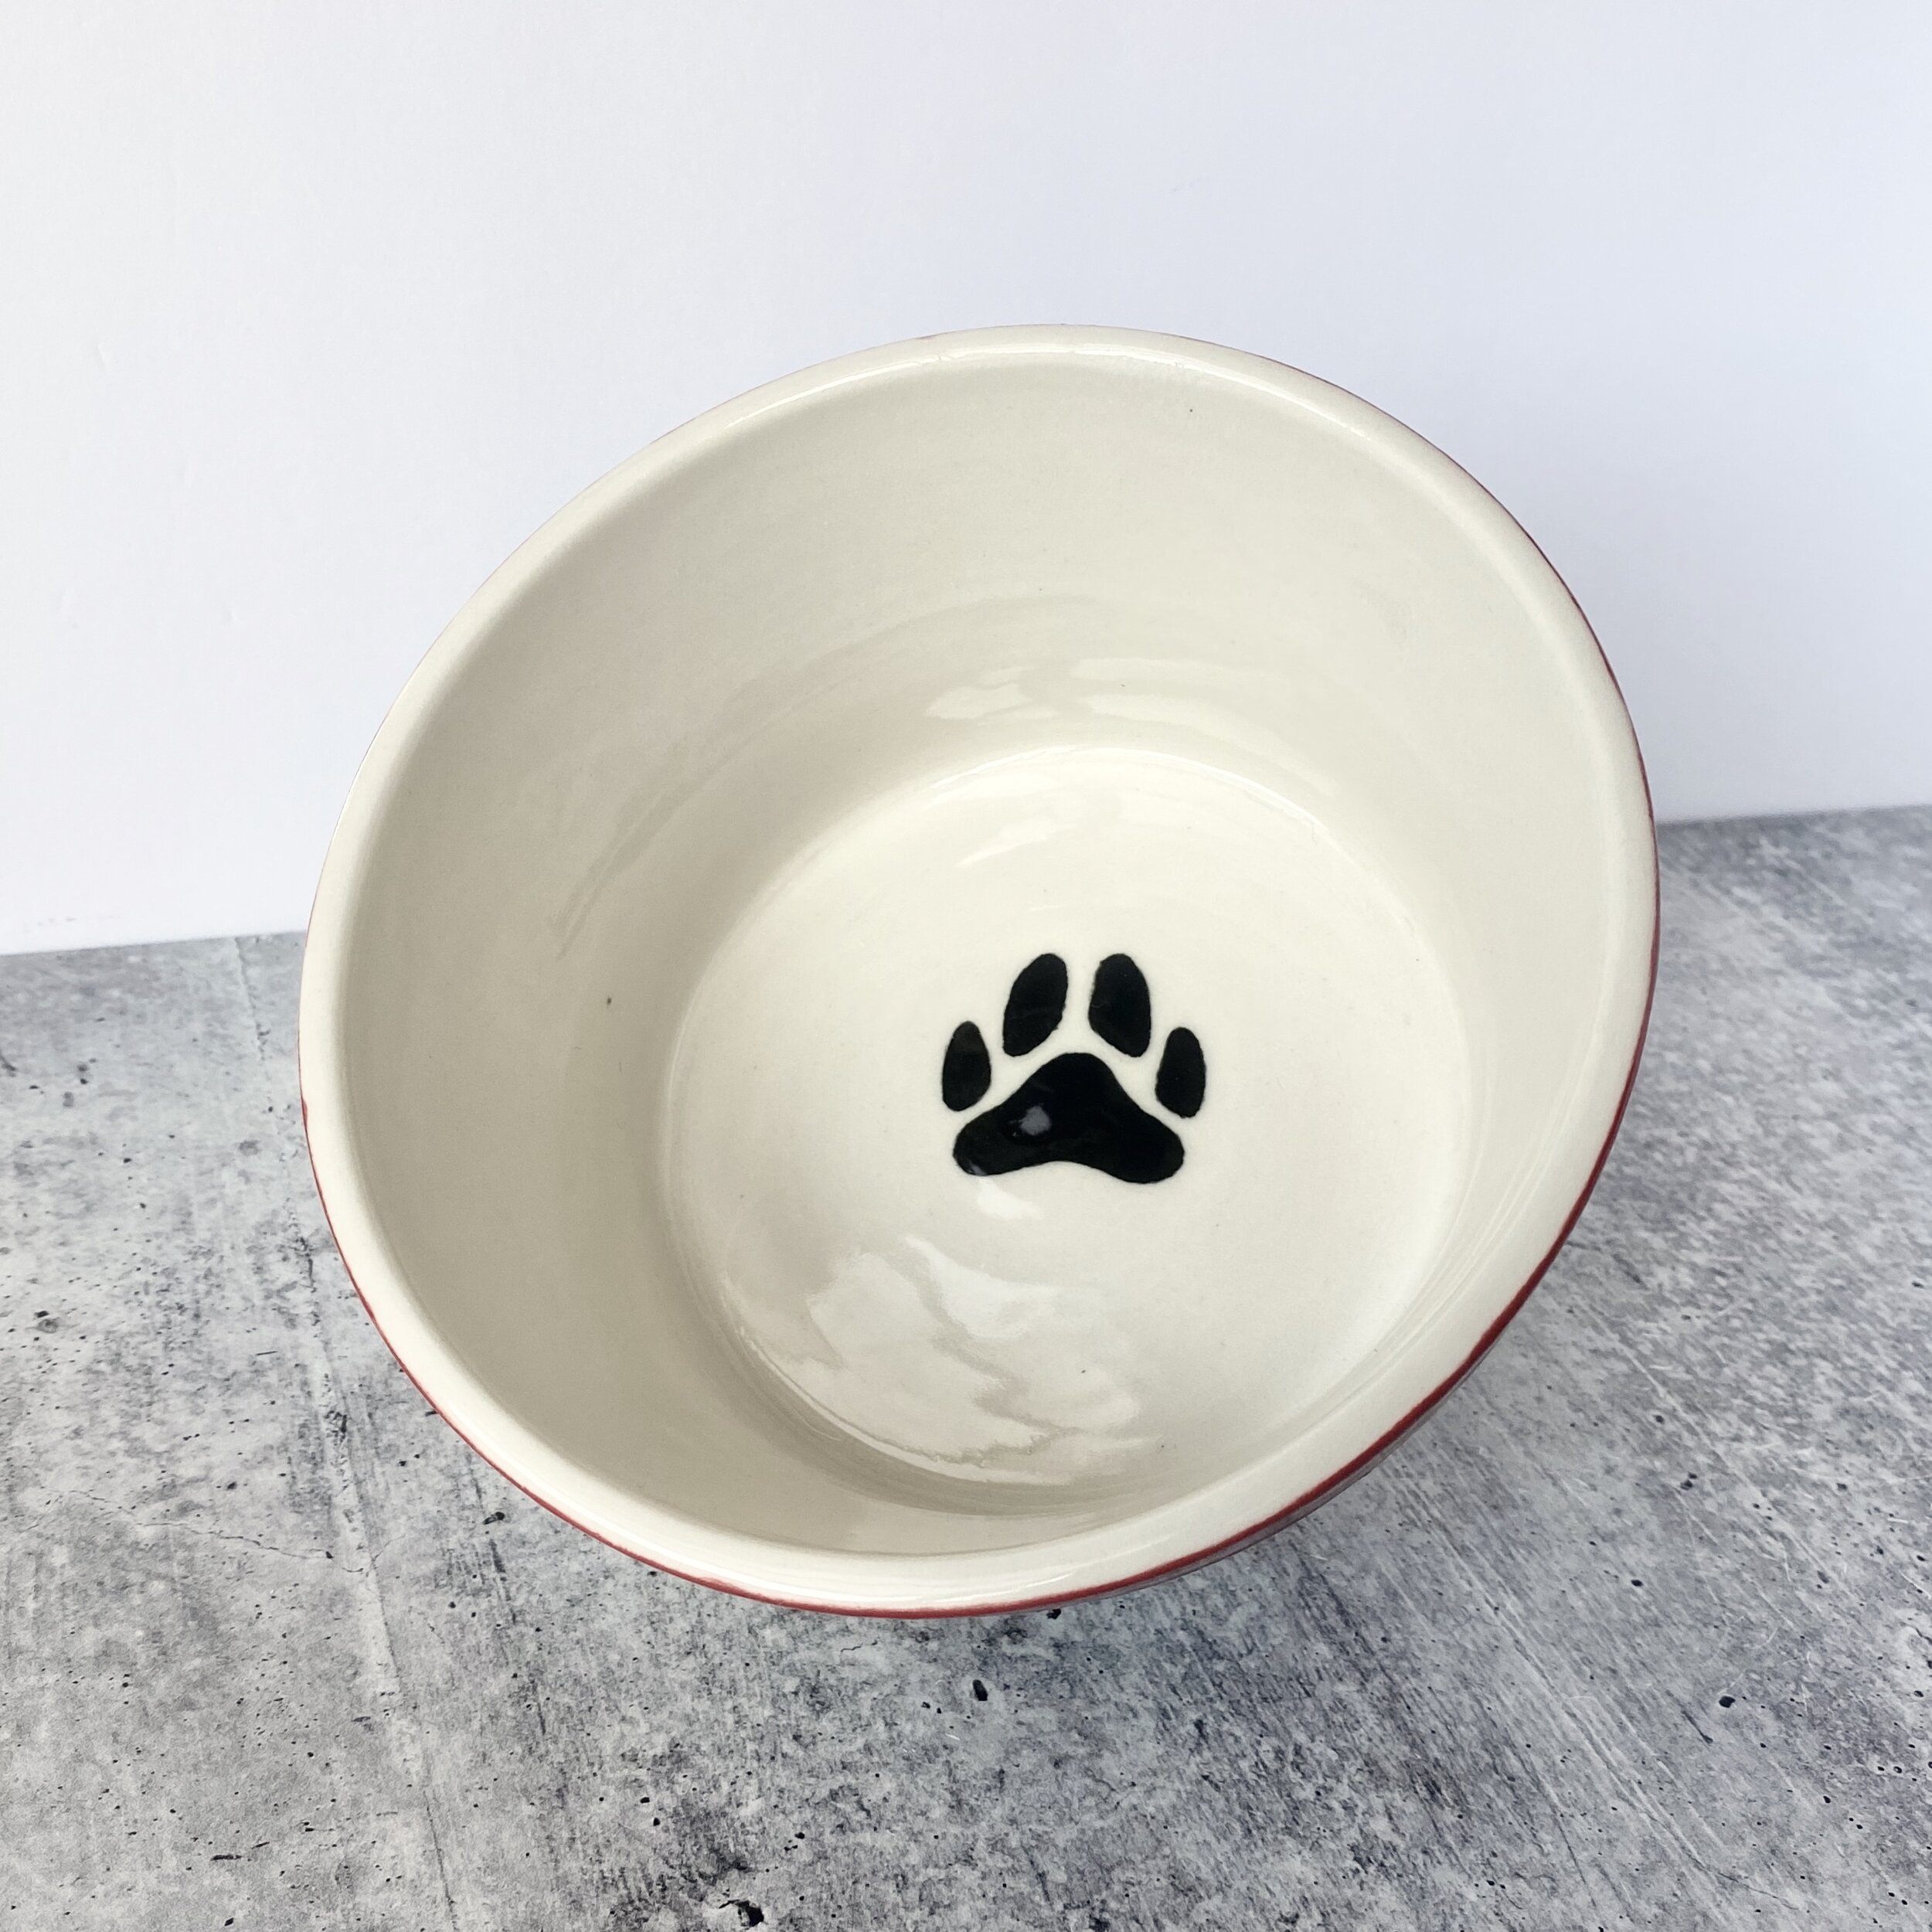 Paw detail on the inside of Junior's bowl!